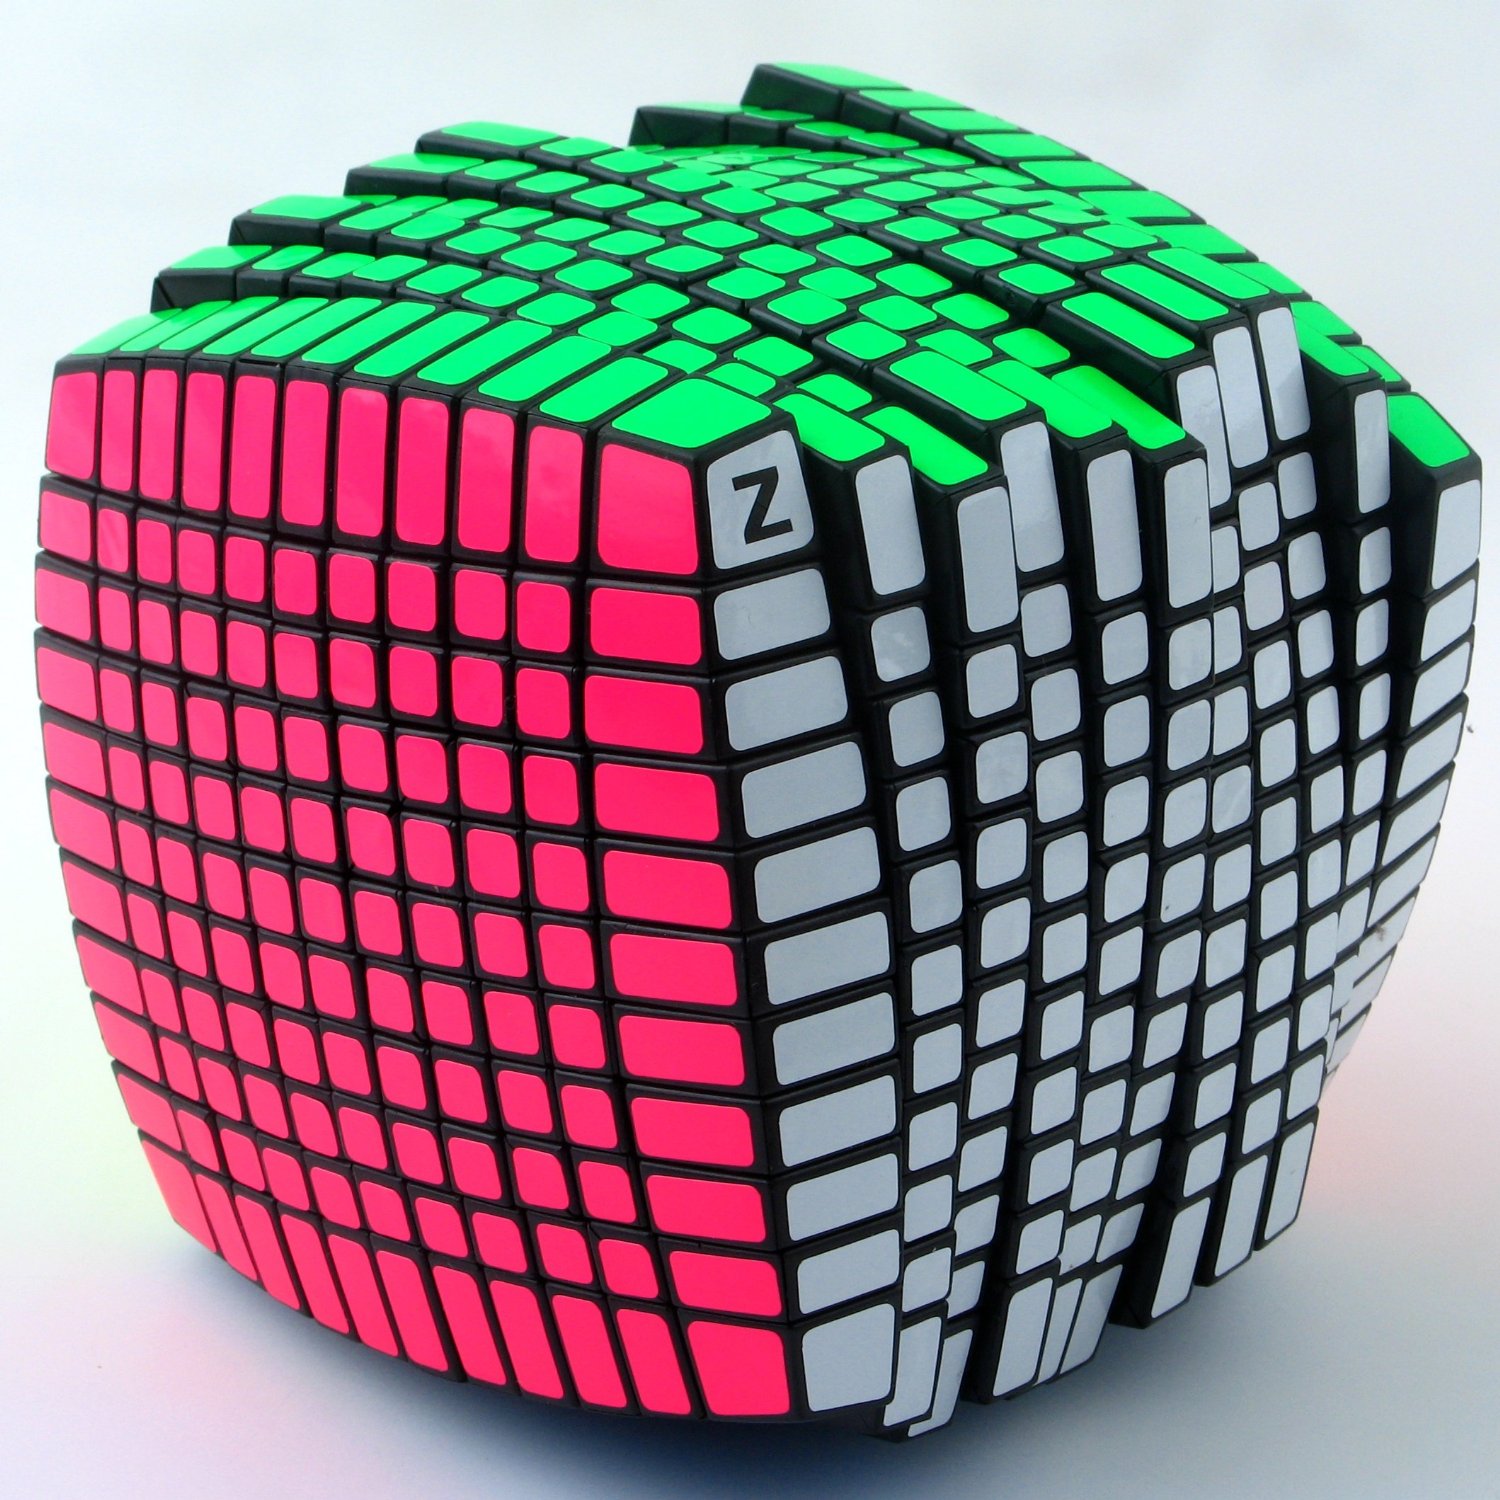 11x11x11 Speed Cube Puzzle Oh My Thats Awesome